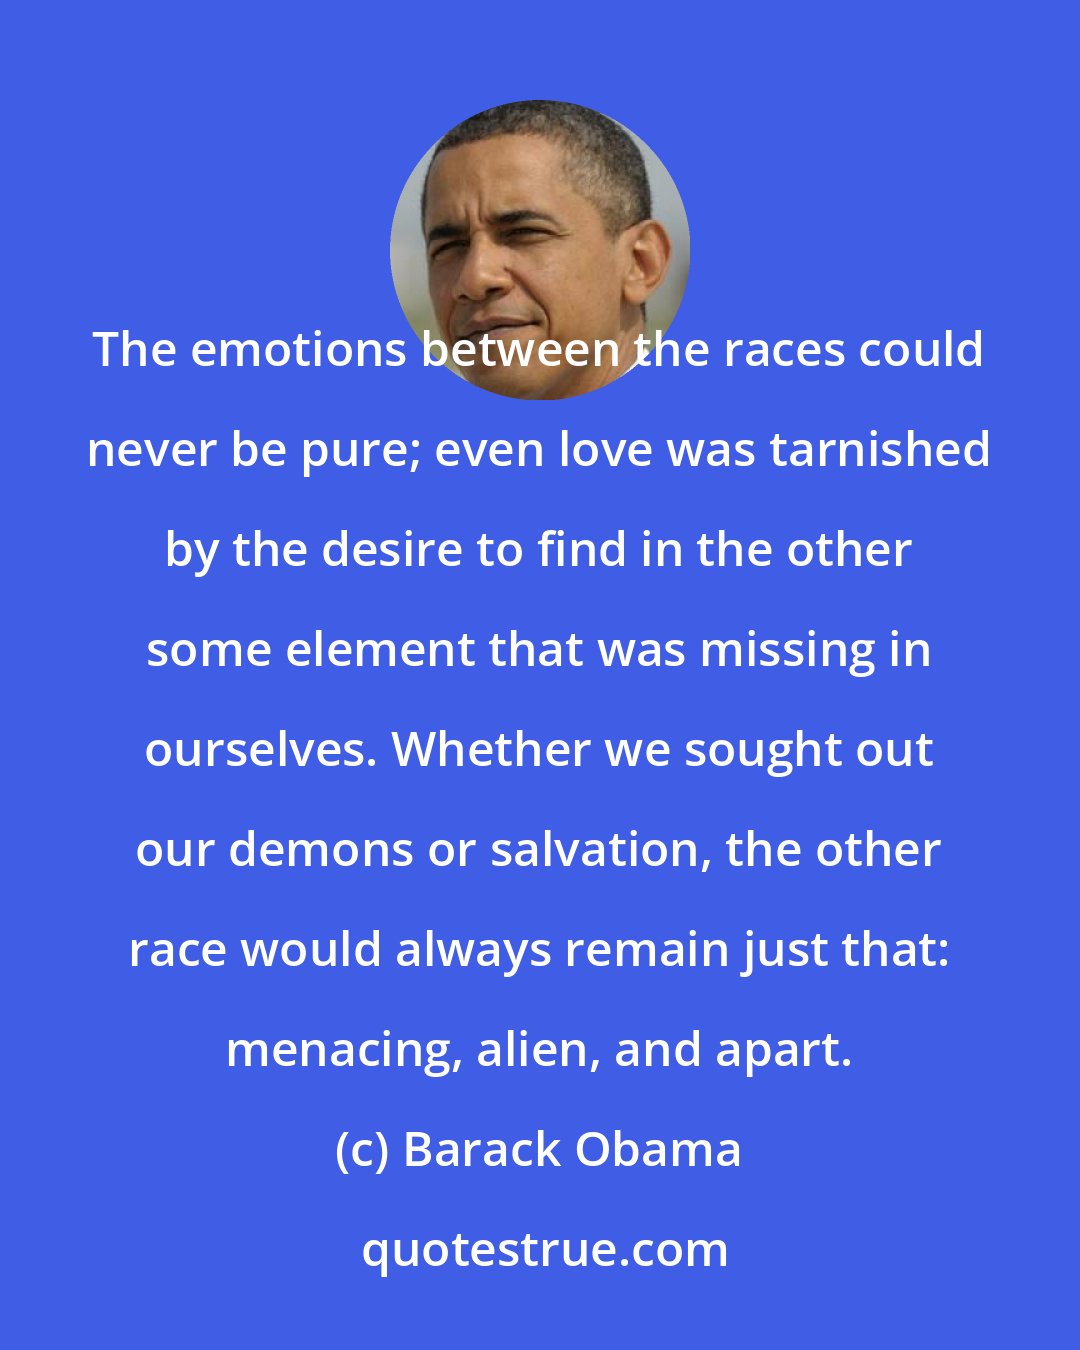 Barack Obama: The emotions between the races could never be pure; even love was tarnished by the desire to find in the other some element that was missing in ourselves. Whether we sought out our demons or salvation, the other race would always remain just that: menacing, alien, and apart.